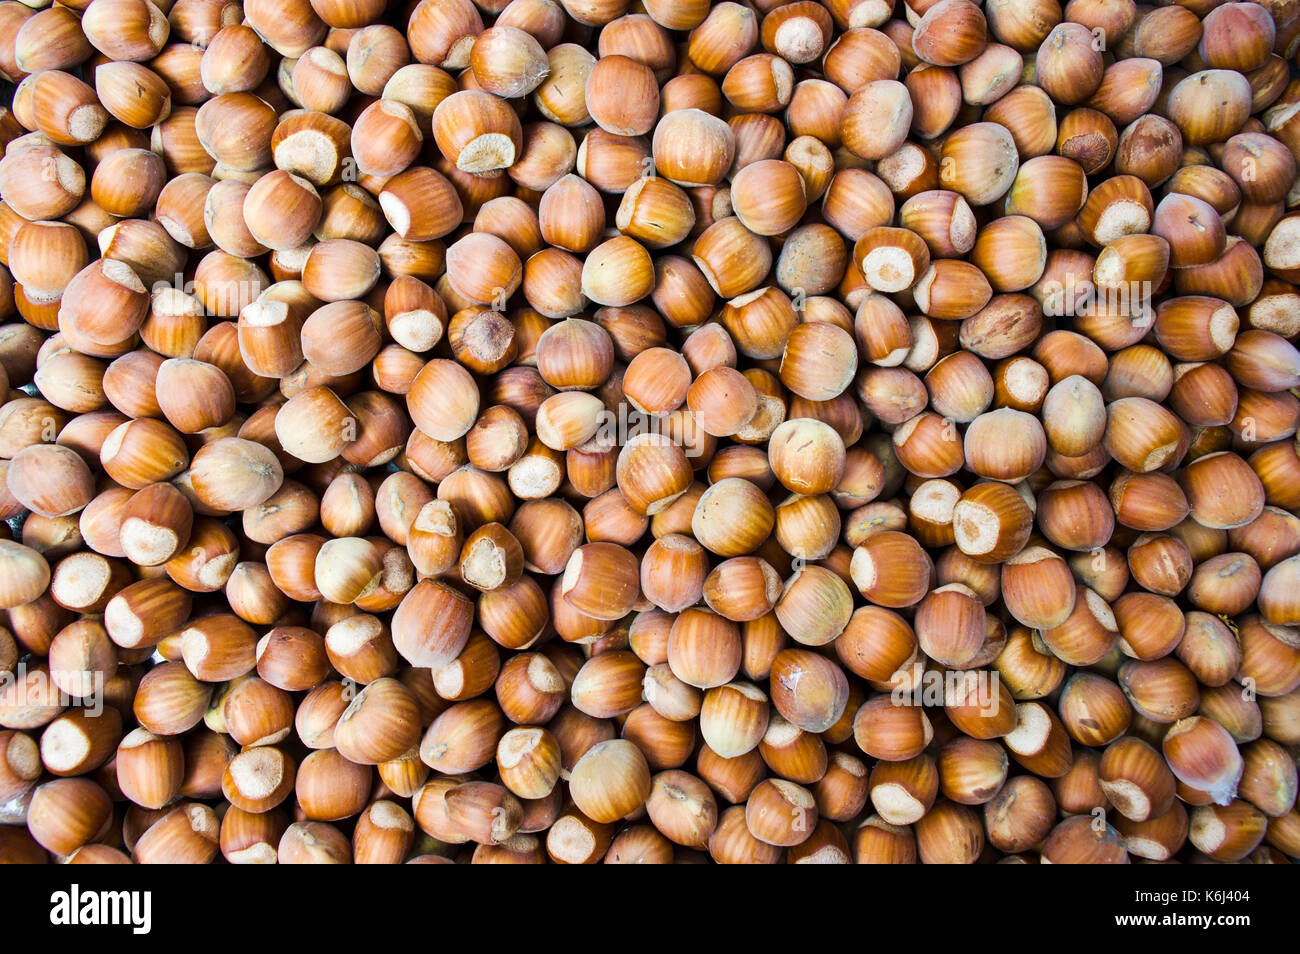 Bunch of fresh hazelnuts forming a background Stock Photo